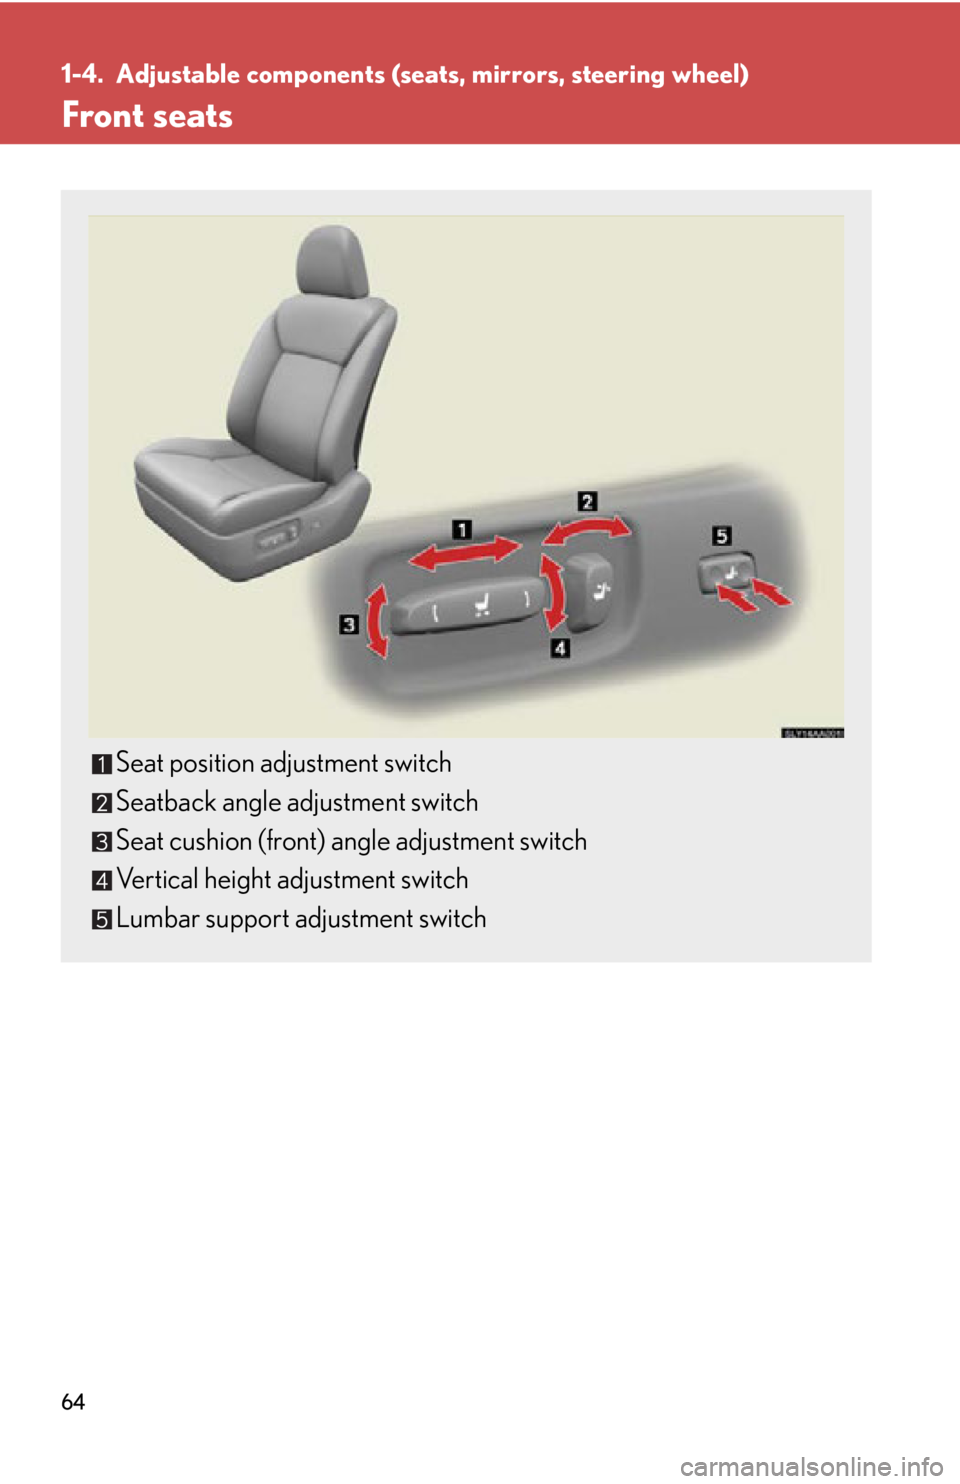 Lexus HS250h 2010  Basic Information Before Operation / LEXUS 2010 HS250H OWNERS MANUAL (OM75006U) 64
1-4. Adjustable components (seats, mirrors, steering wheel)
Front seats
Seat position adjustment switch
Seatback angle adjustment switch
Seat cushion (front) angle adjustment switch
Vertical height